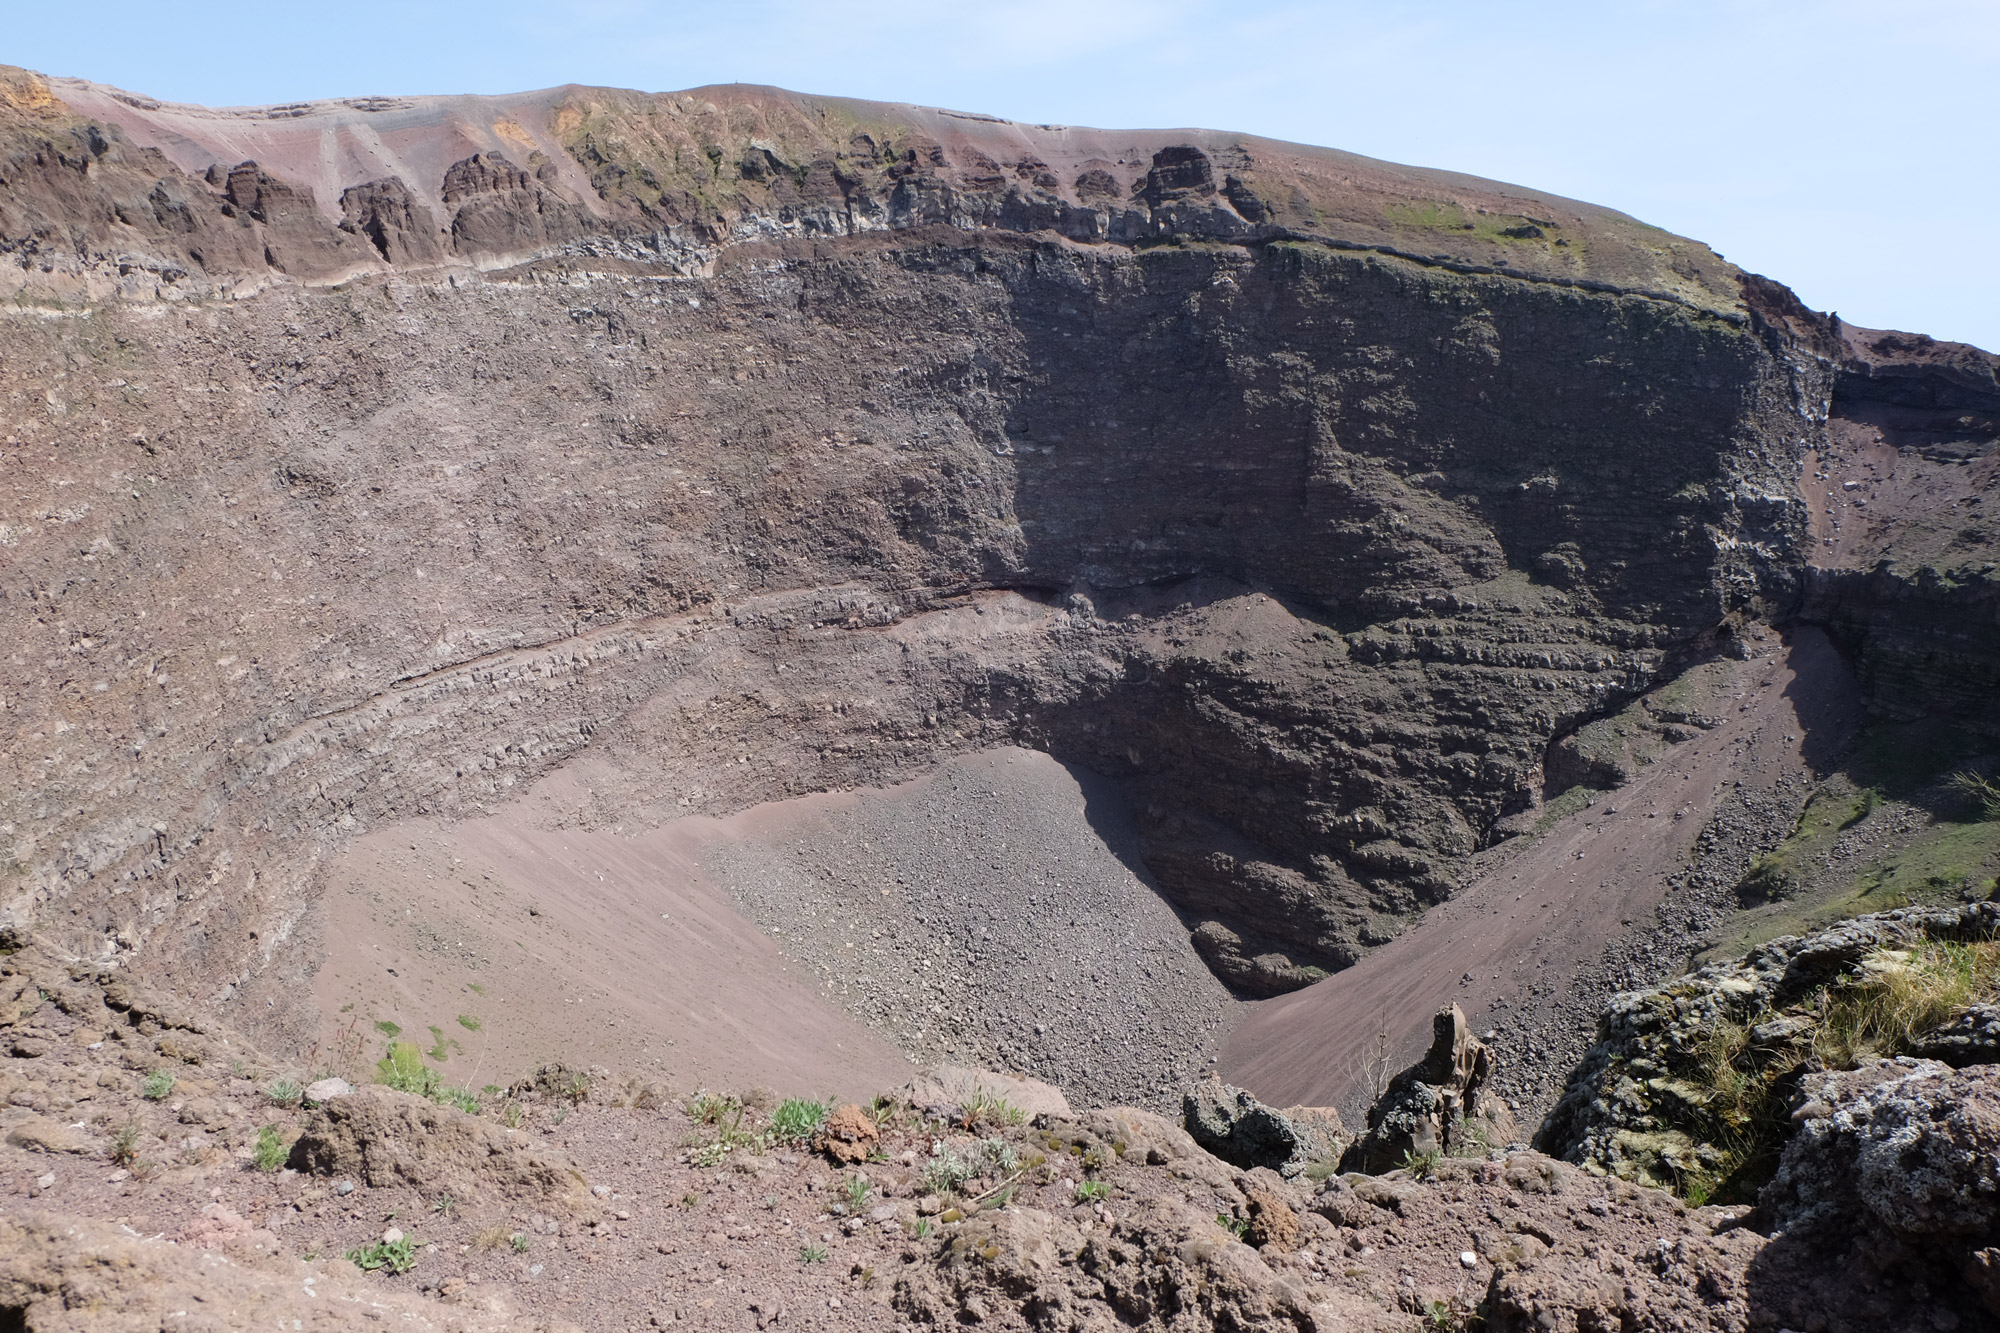 The crater at the top of Vesuvius